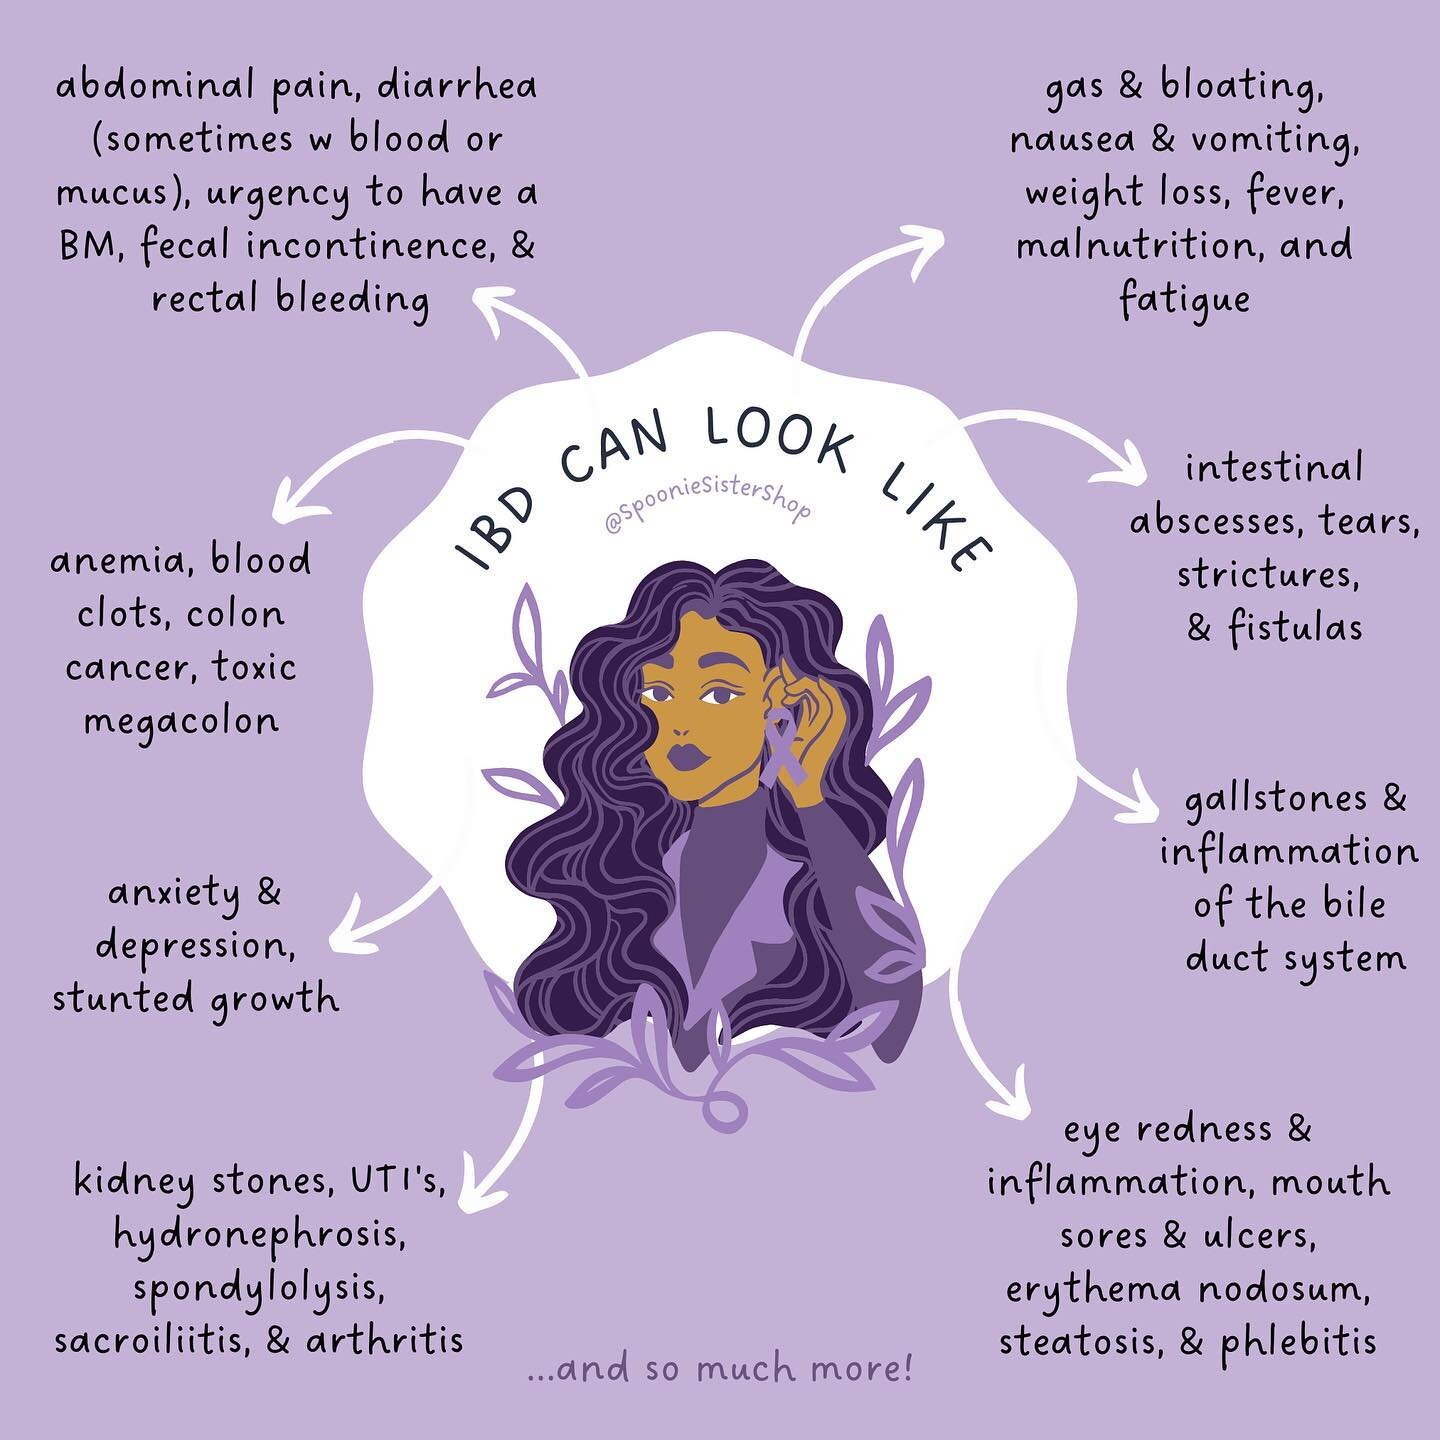 today is world IBD day &amp; #reds4veds day! 💜❤️

inflammatory bowel disease can look like:
💜 ab. pain, diarrhea (sometimes w blo0d or mucus), urgency to have a BM, fecal incontinence, &amp; rectal b1eeding
💜 gas &amp; bloating, nausea &amp; vomit